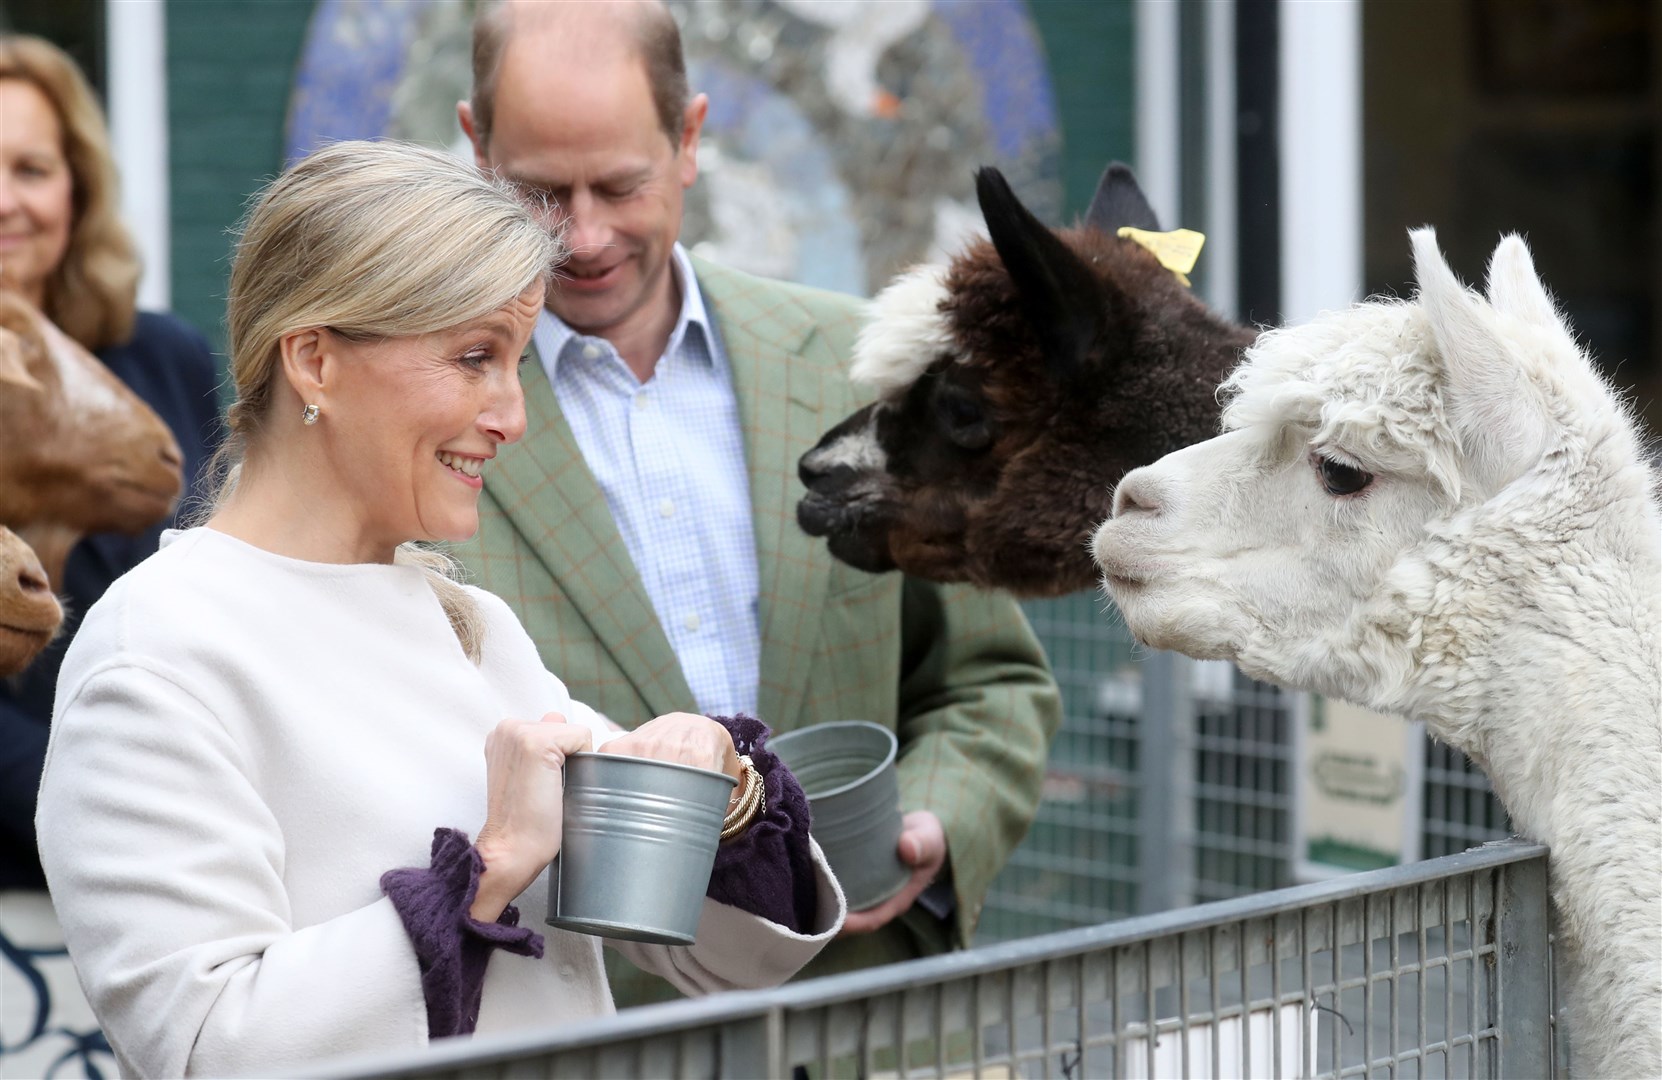 The Earl and Countess of Wessex feed Alpacas during their visit to Vauxhall City Farm (Chris Jackson/PA)